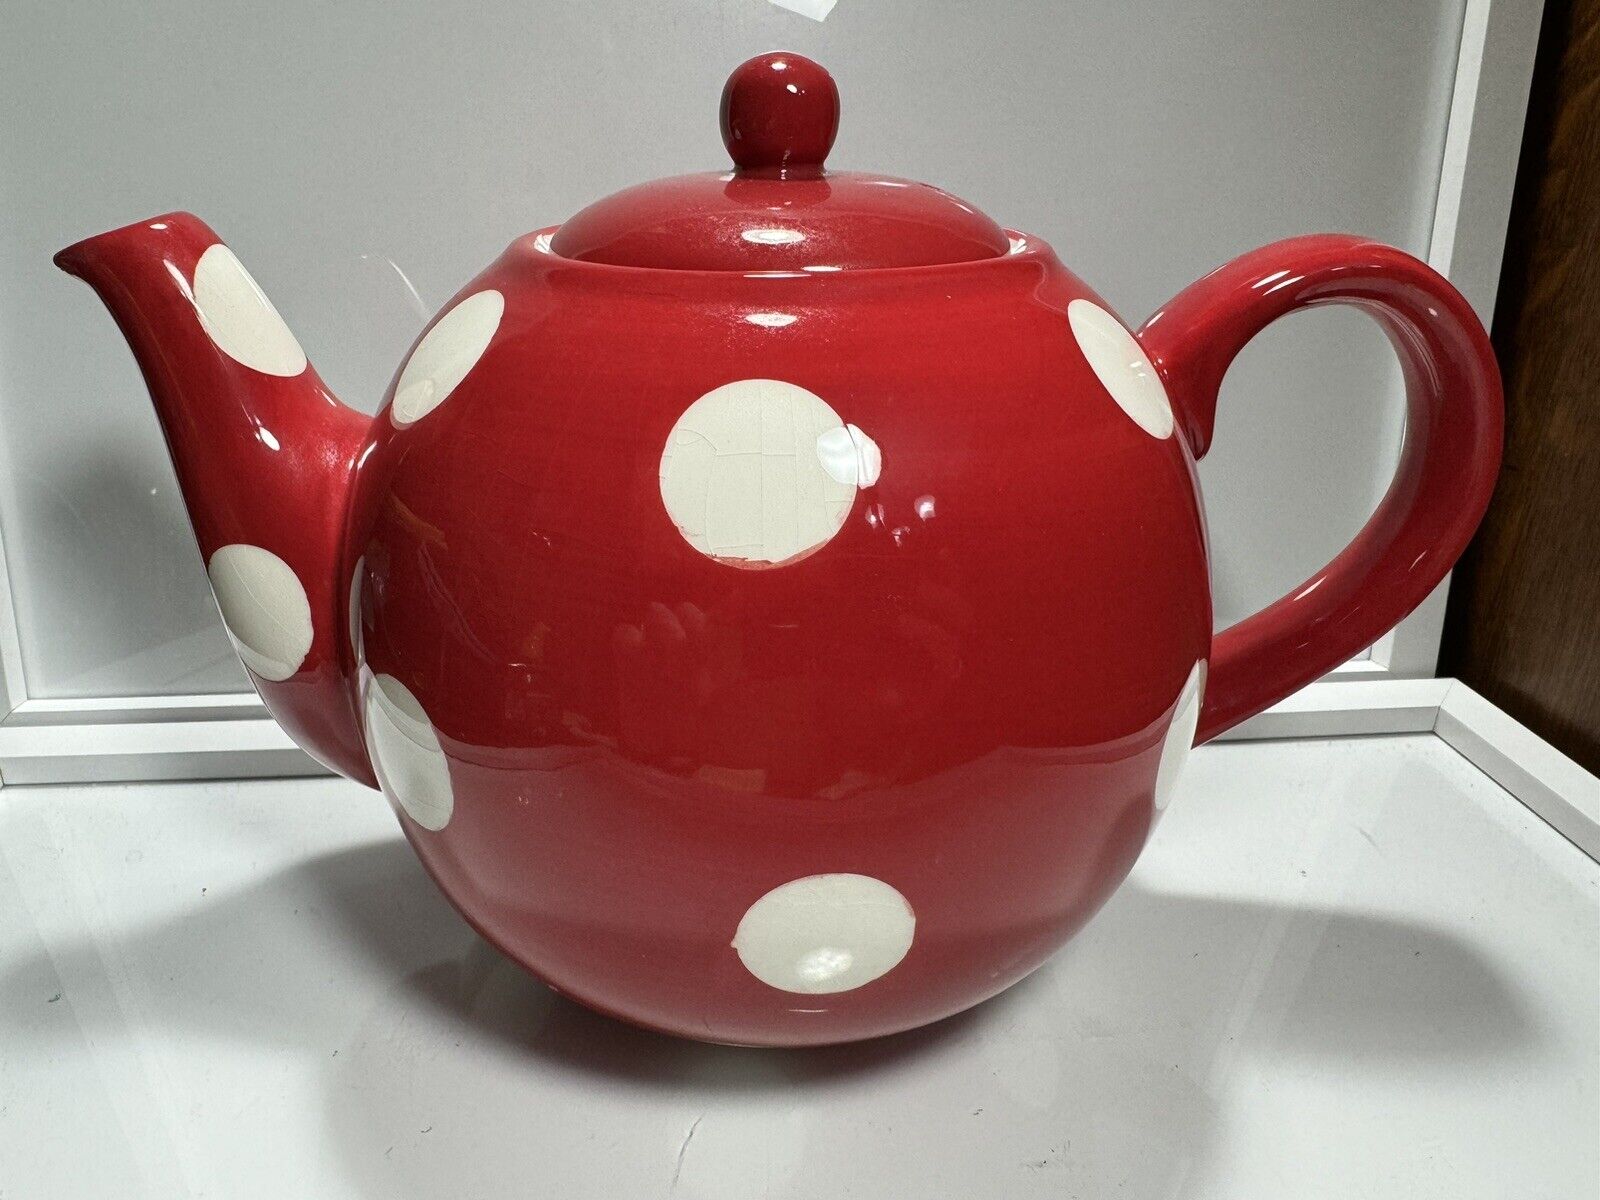 Red Teapot With White Dots